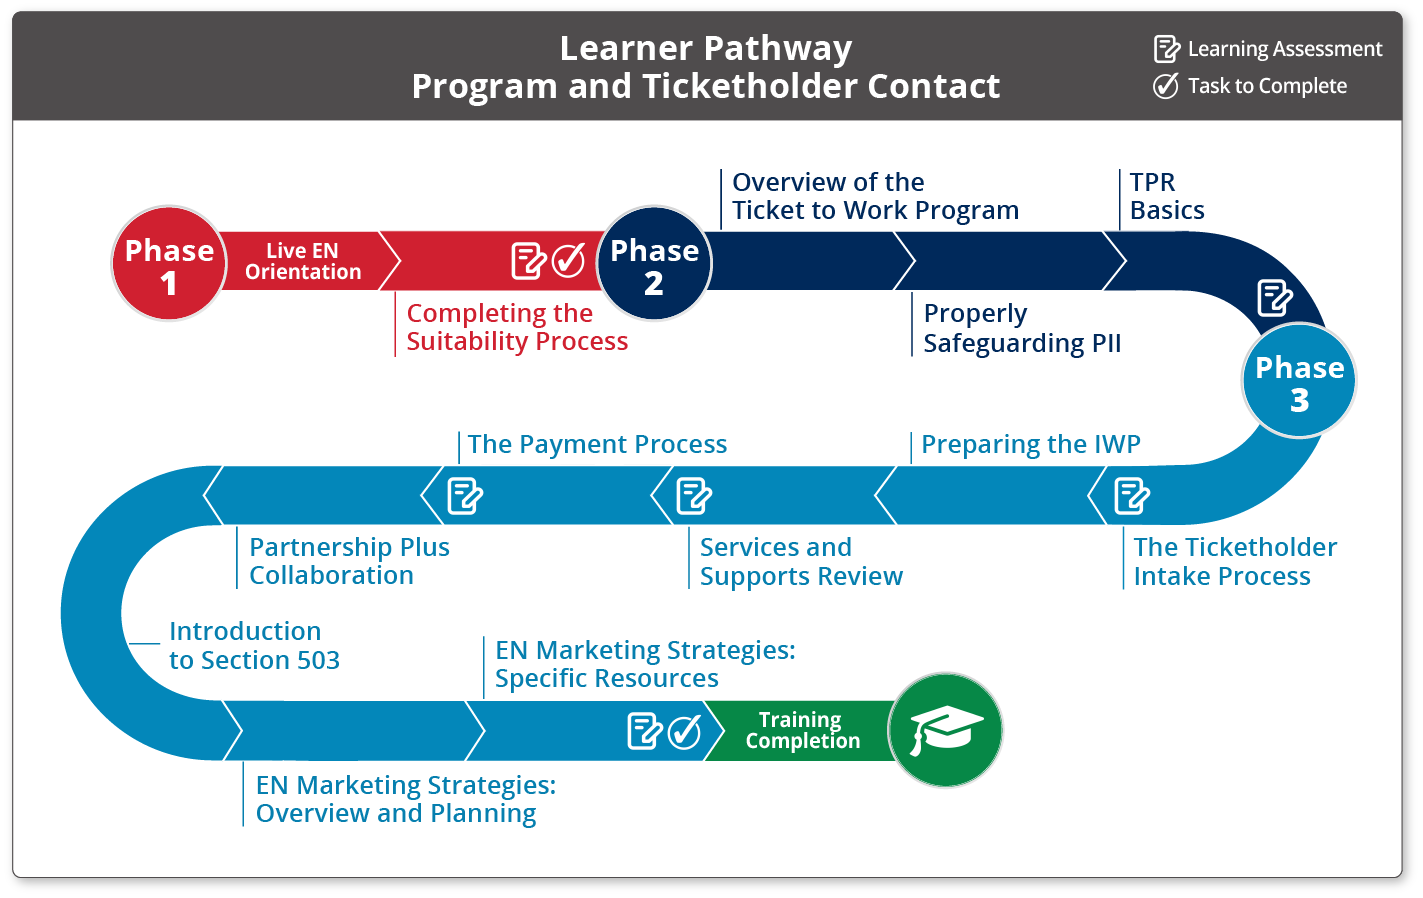 Learner Pathway Program and Ticketholder Contact. See caption for full description.